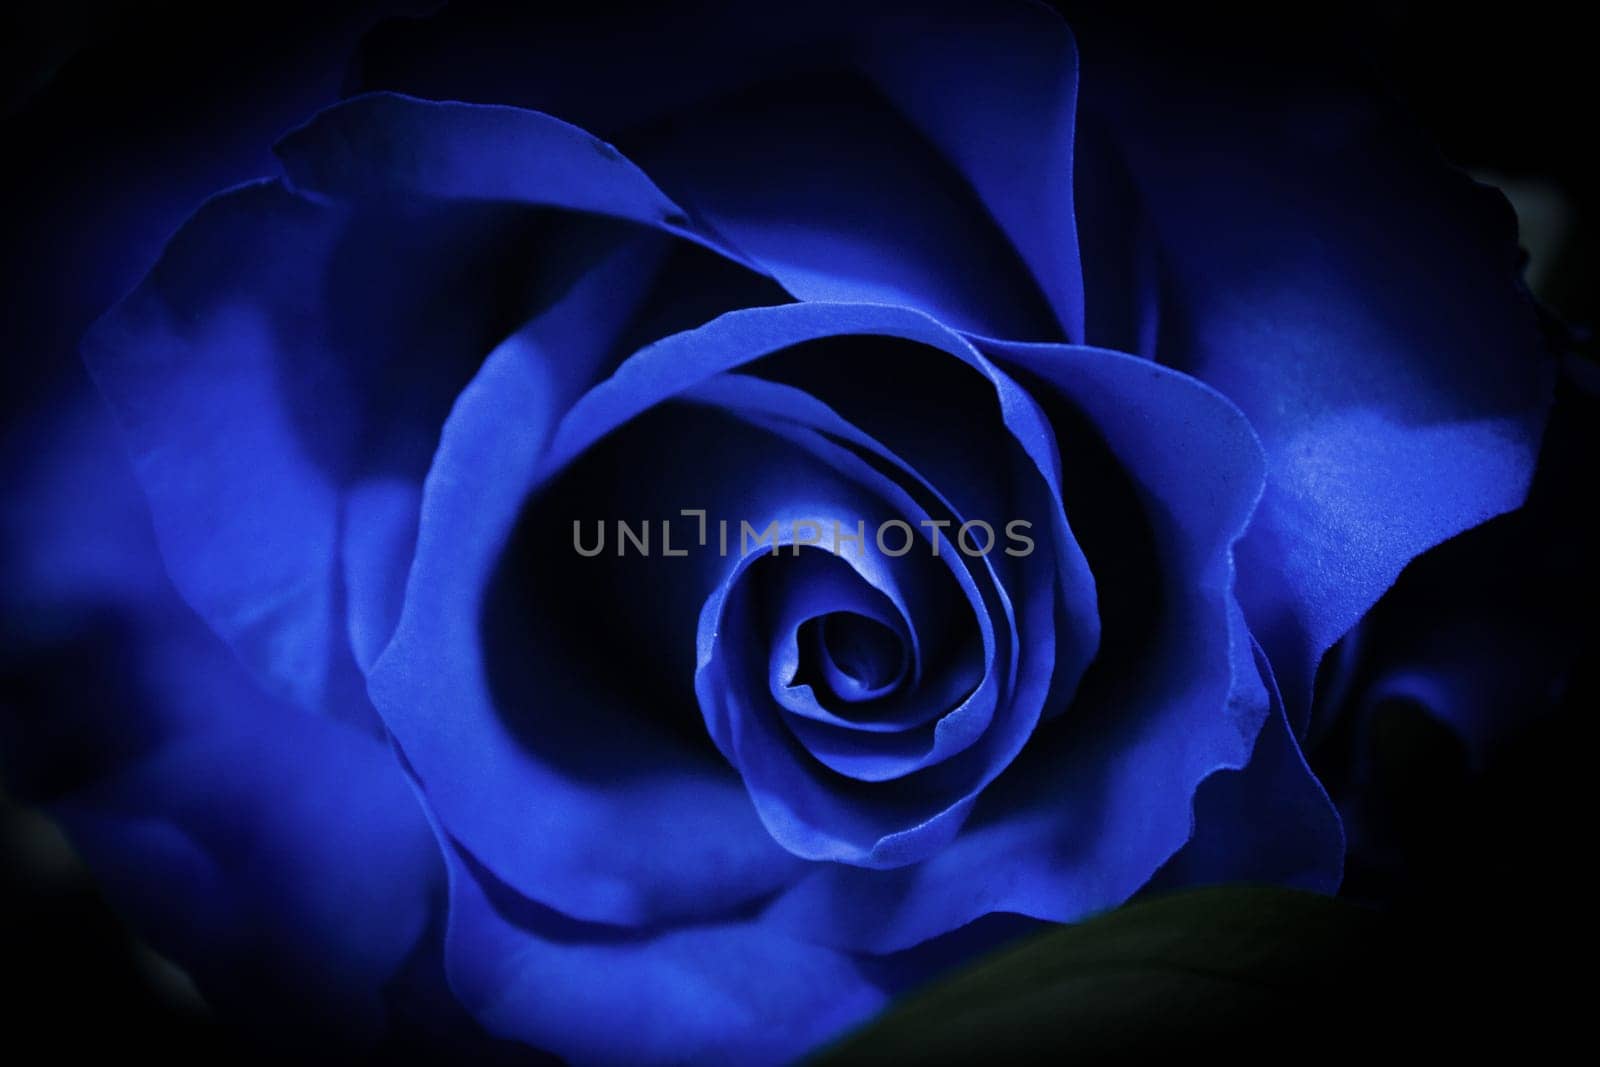 Natural blue rose on grayish background by GemaIbarra